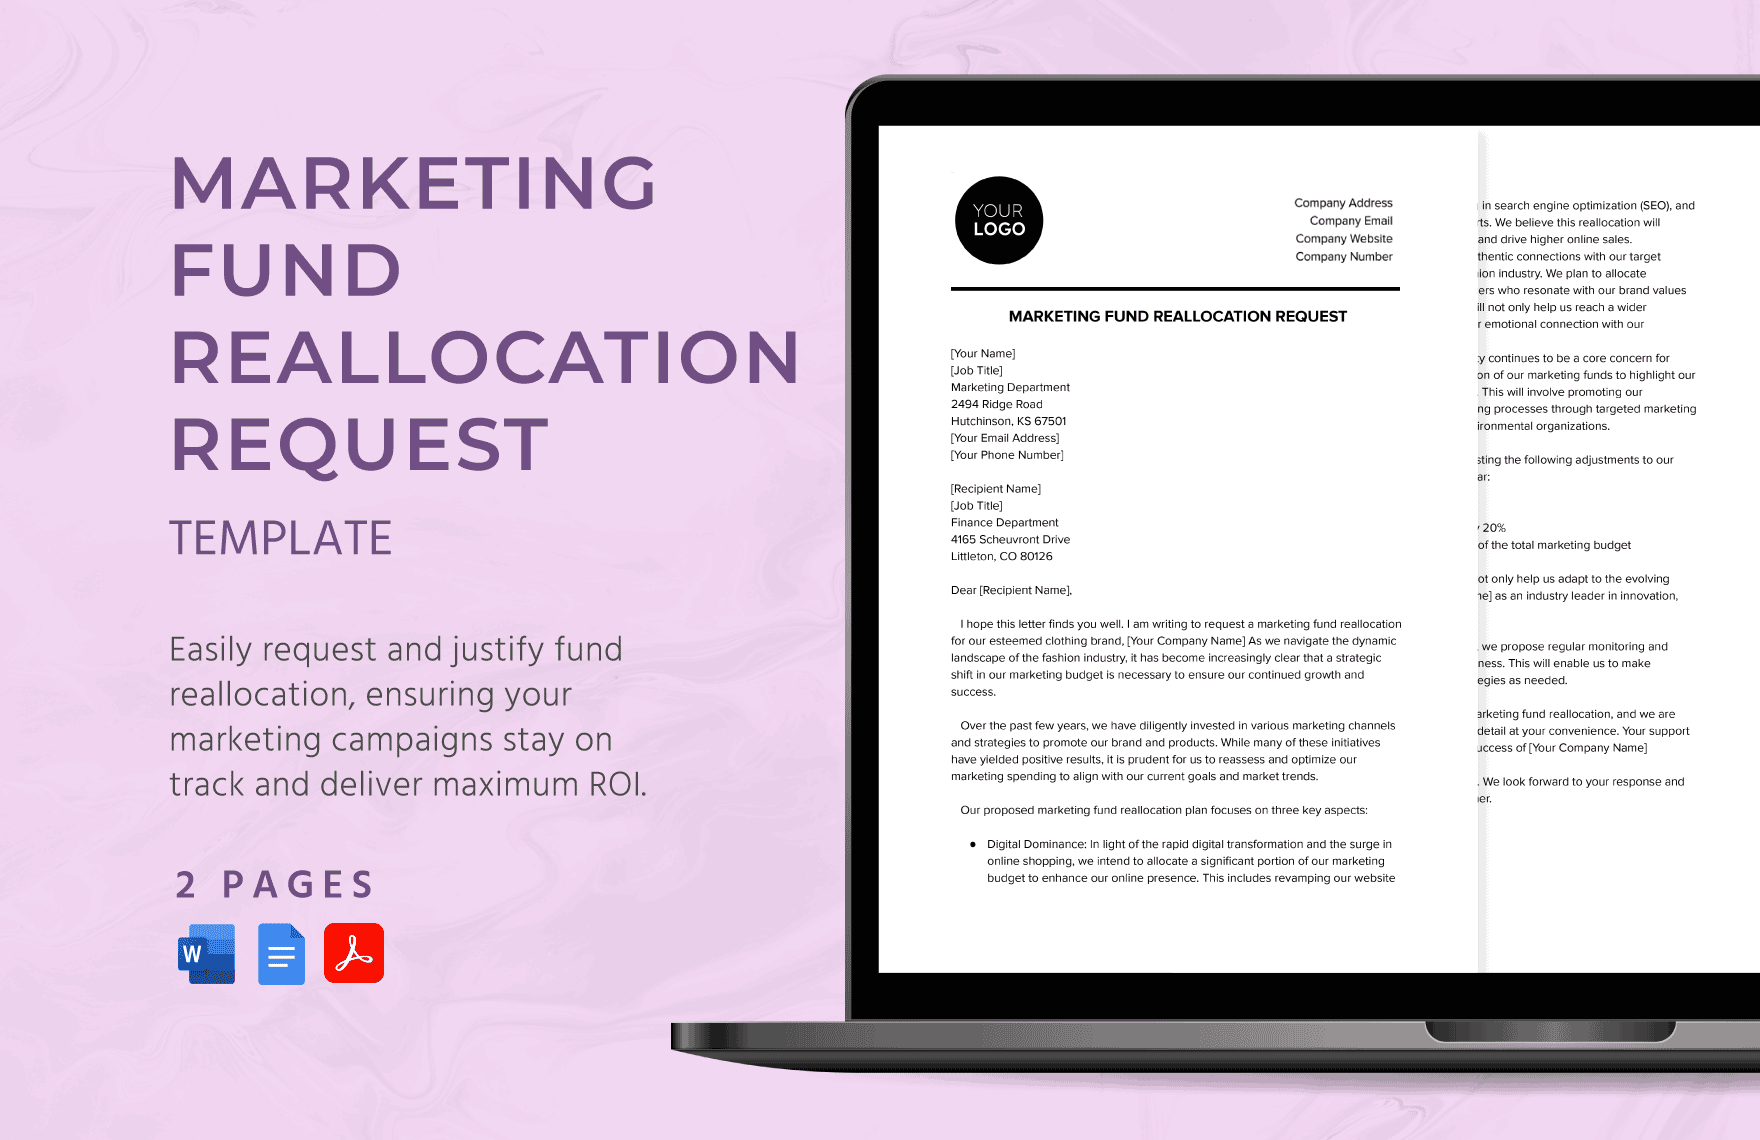 Marketing Fund Reallocation Request Template